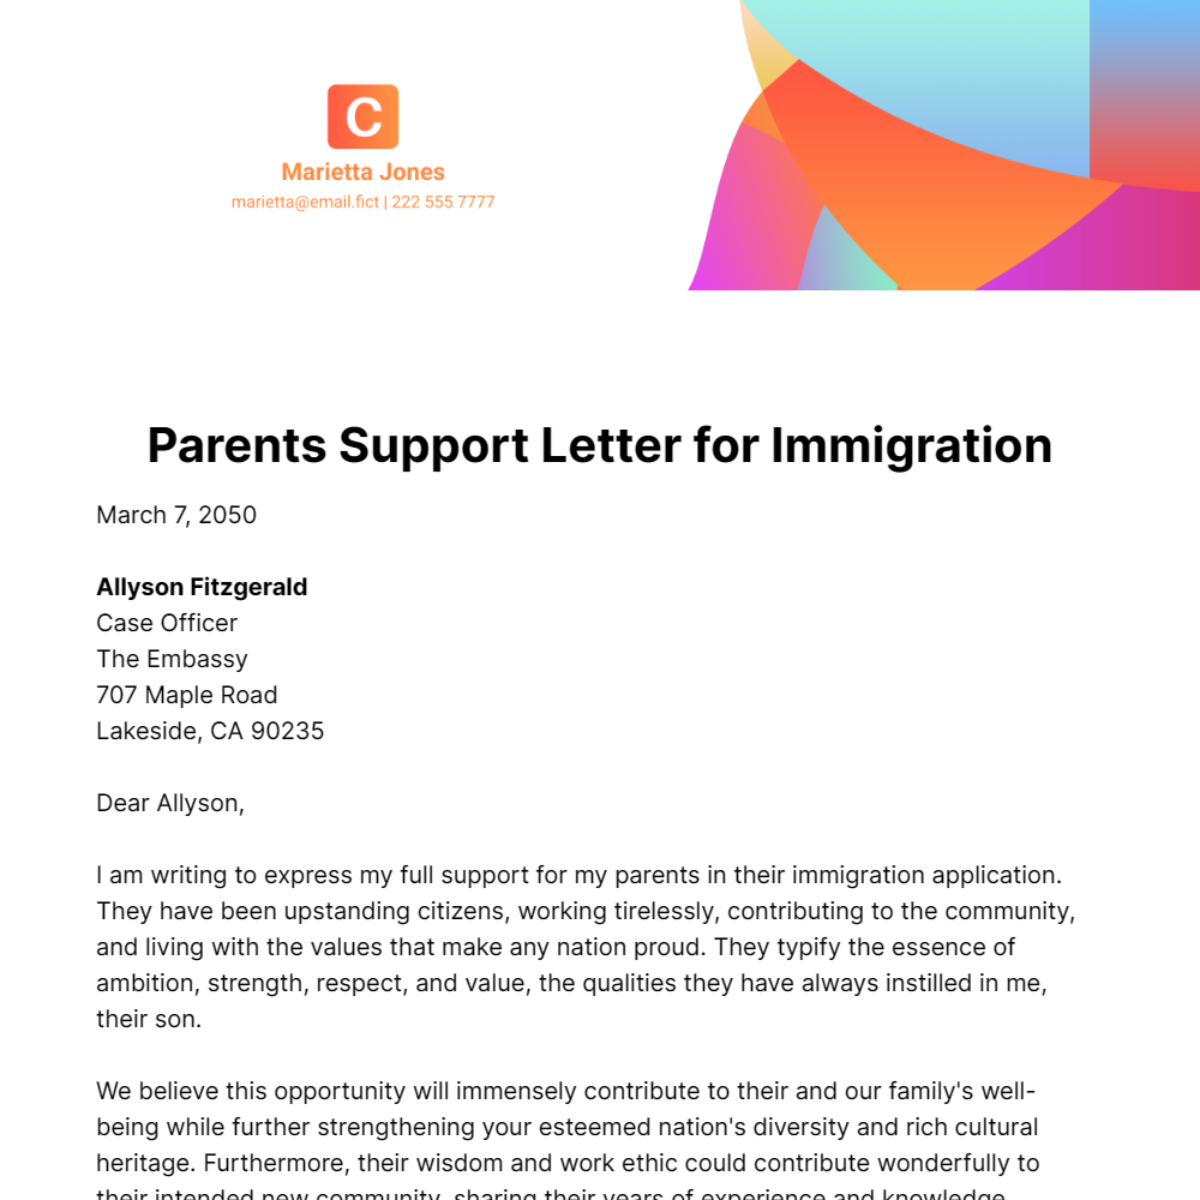 Parents Support Letter for Immigration Template